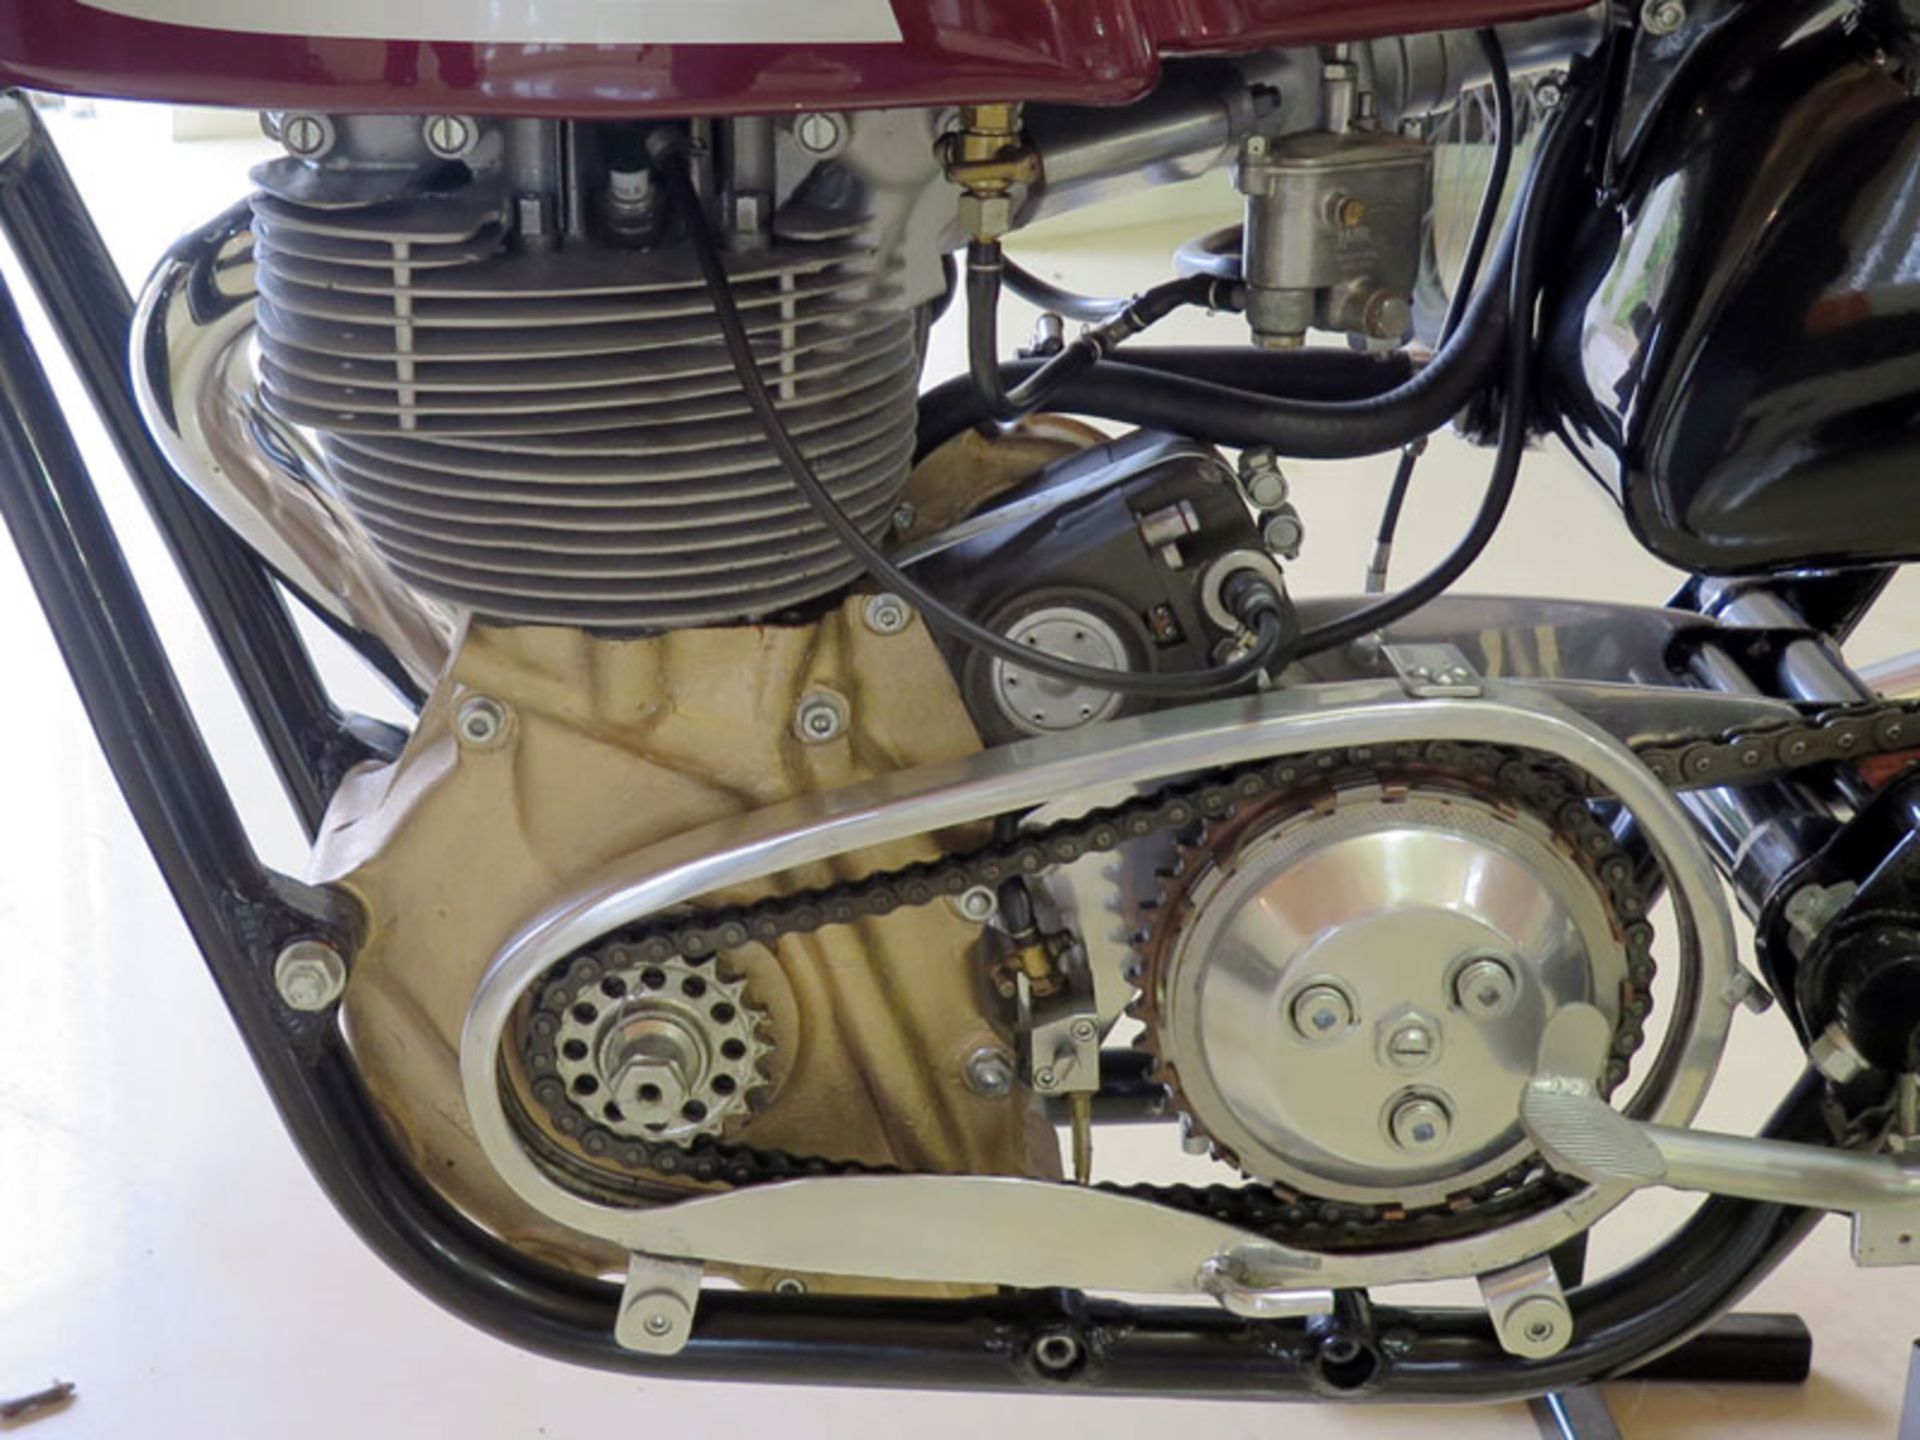 1959 Matchless G50 - Image 3 of 5